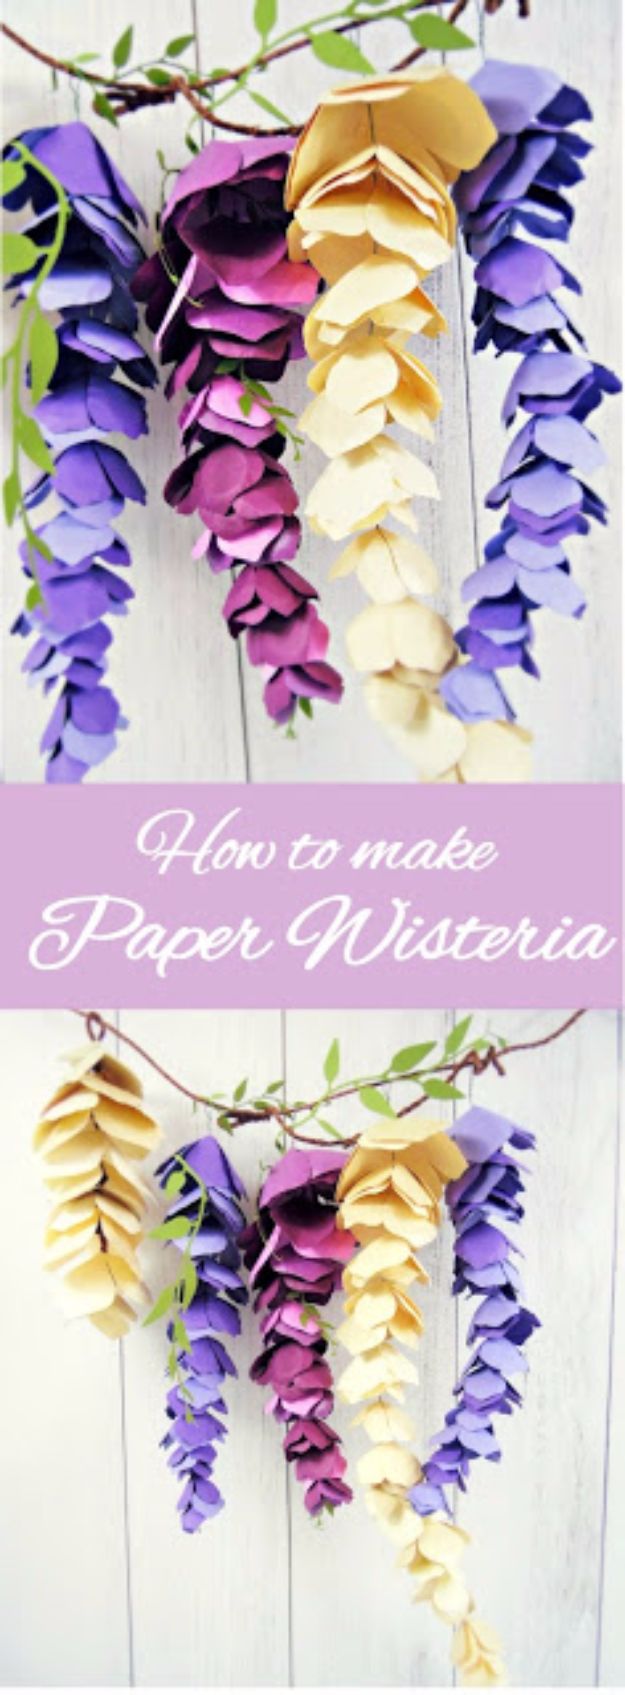 DIY Paper Flowers - Paper Wisteria - How To Make A Paper Flower - Large Wedding Backdrop for Wall Decor - Easy Tissue Paper Flower Tutorial for Kids - Giant Projects for Photo Backdrops - Daisy, Roses, Bouquets, Centerpieces - Cricut Template and Step by Step Tutorial 